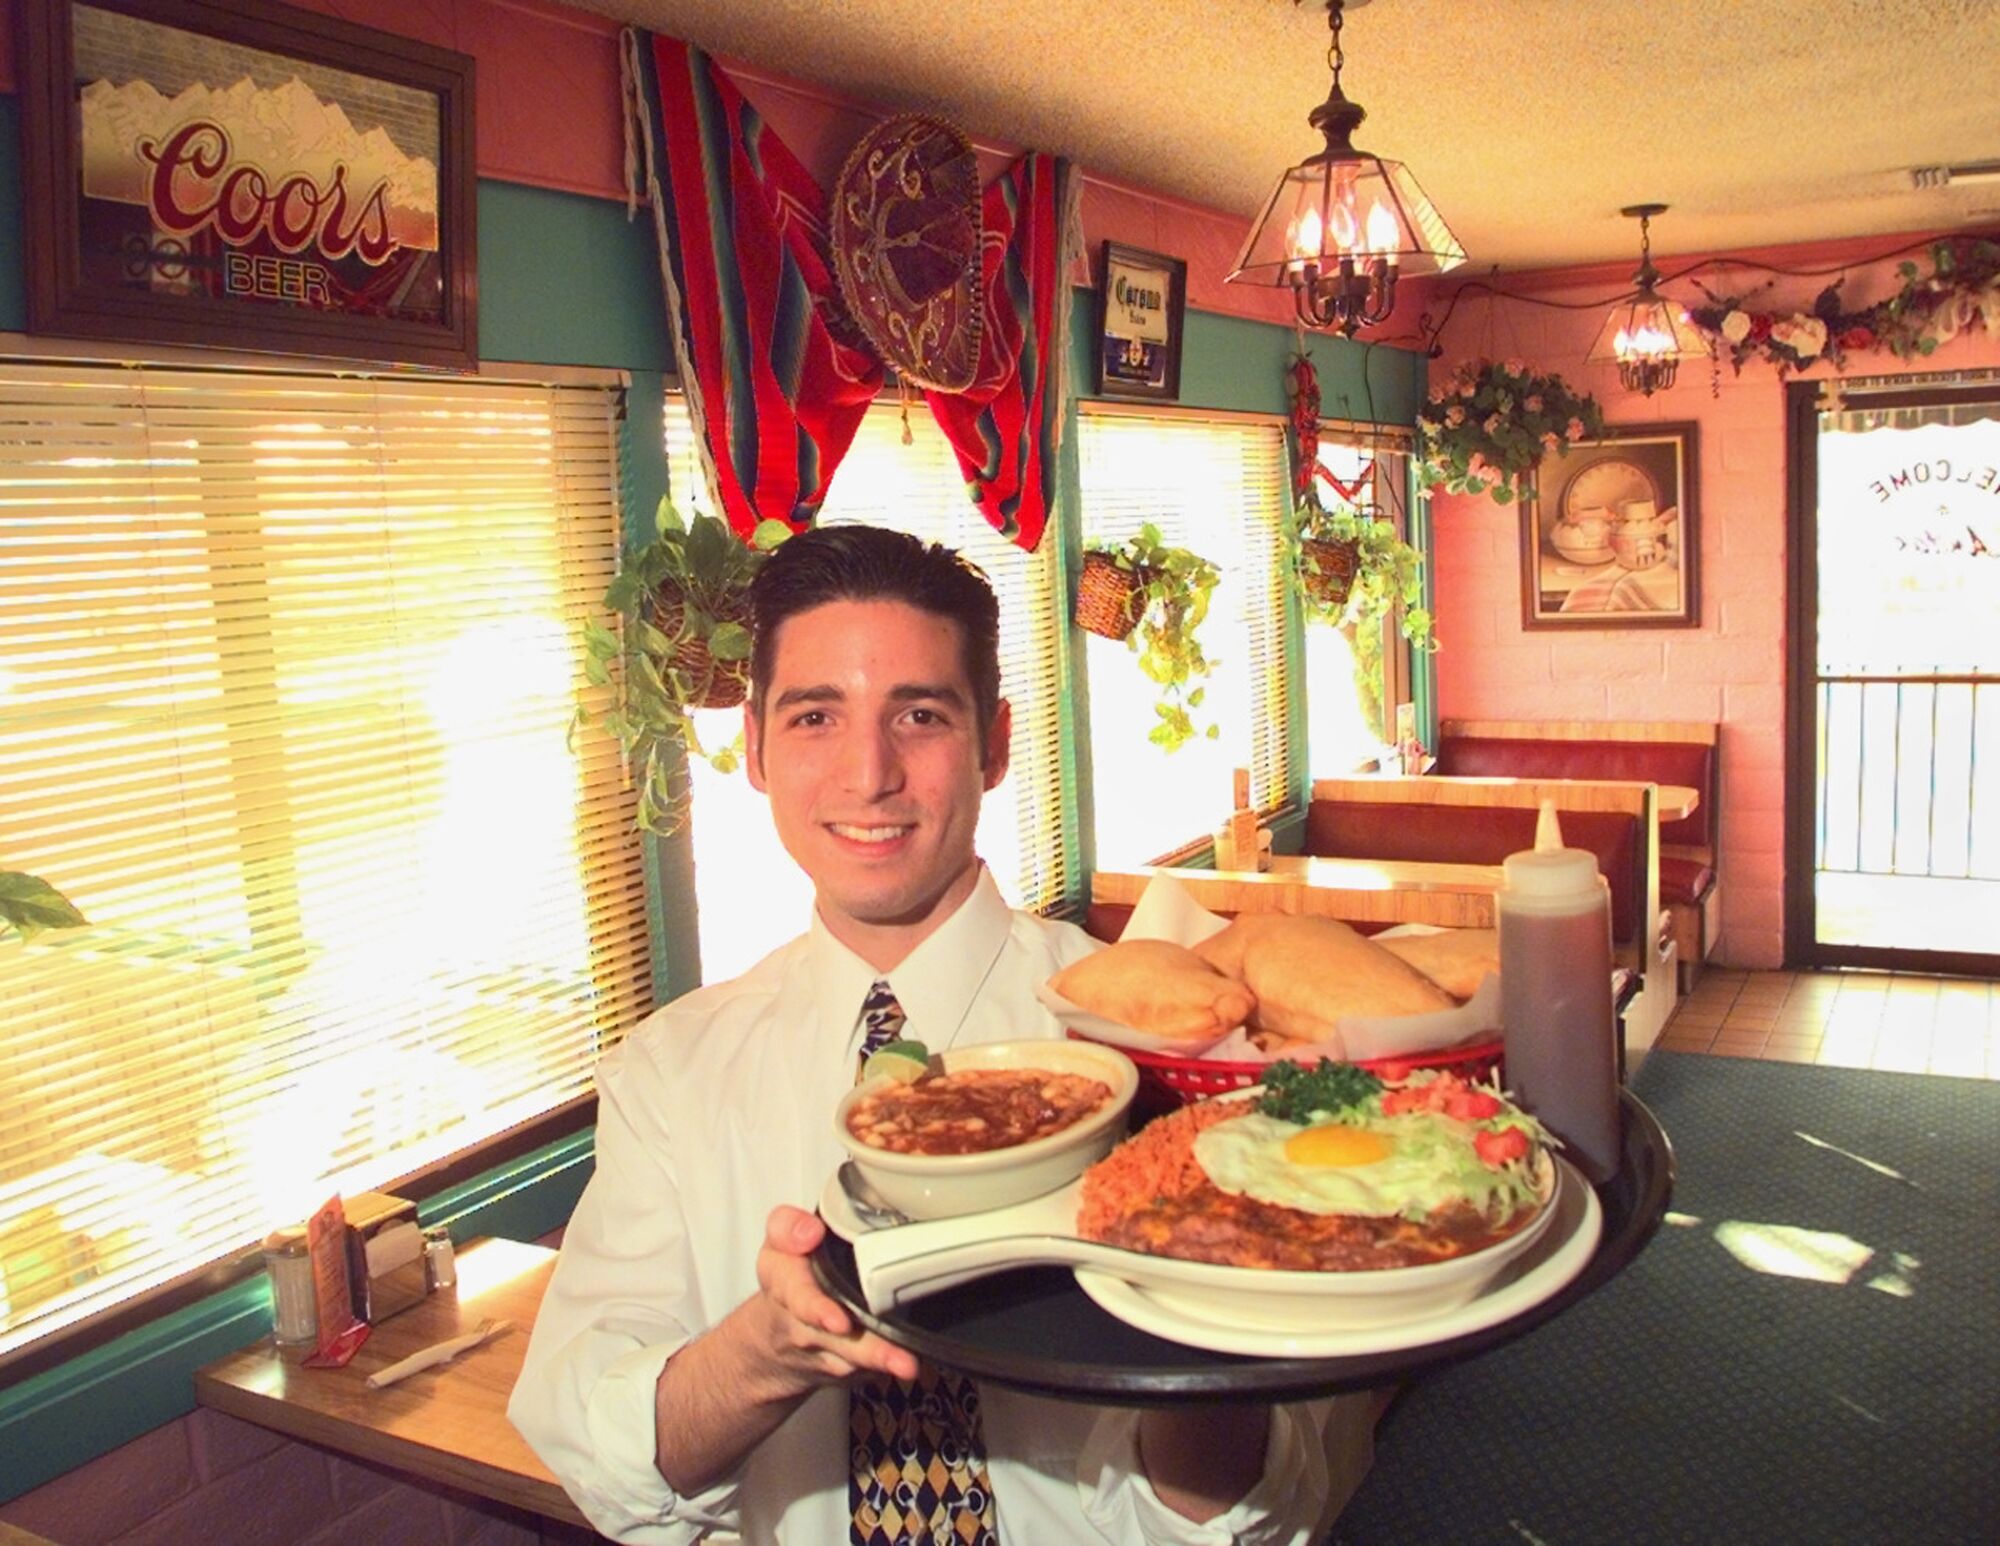 A man holding a tray of food in a restaurant.